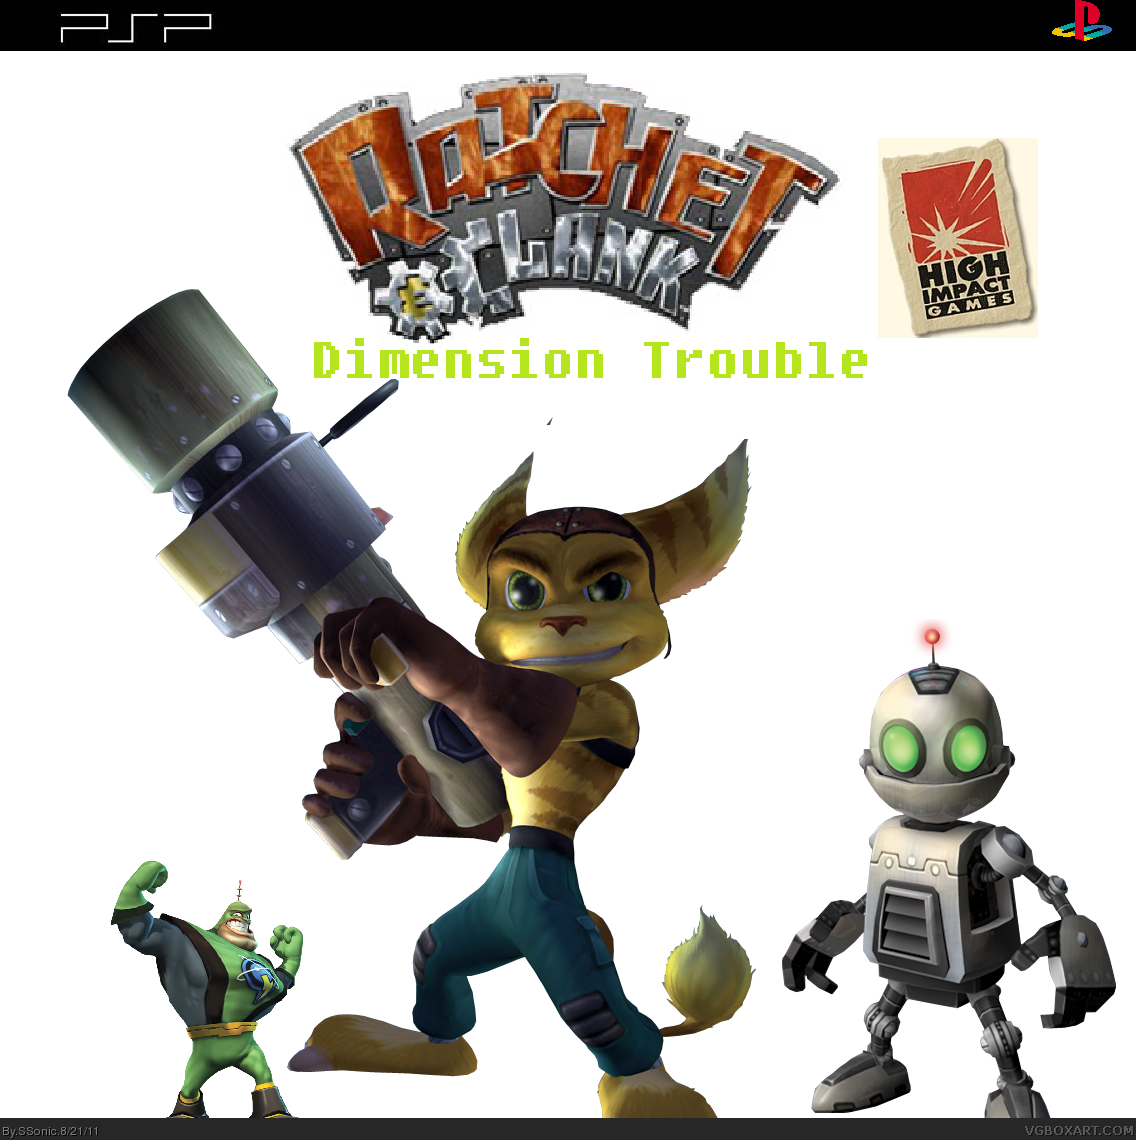 Ratchet and Clank Dimension Trouble box cover